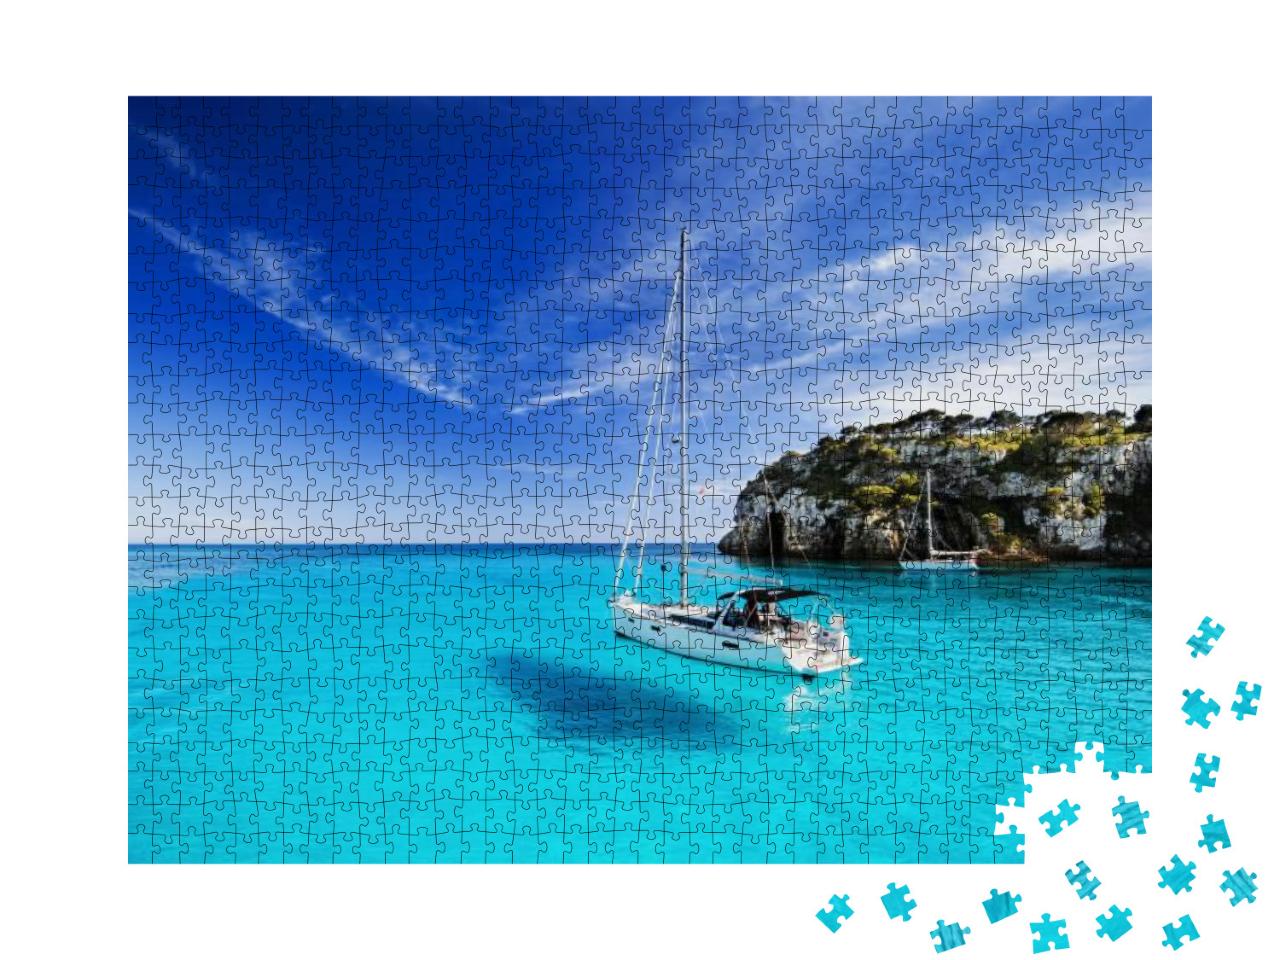 Beautiful Bay with Sailing Boats, Menorca Island, Spain... Jigsaw Puzzle with 1000 pieces